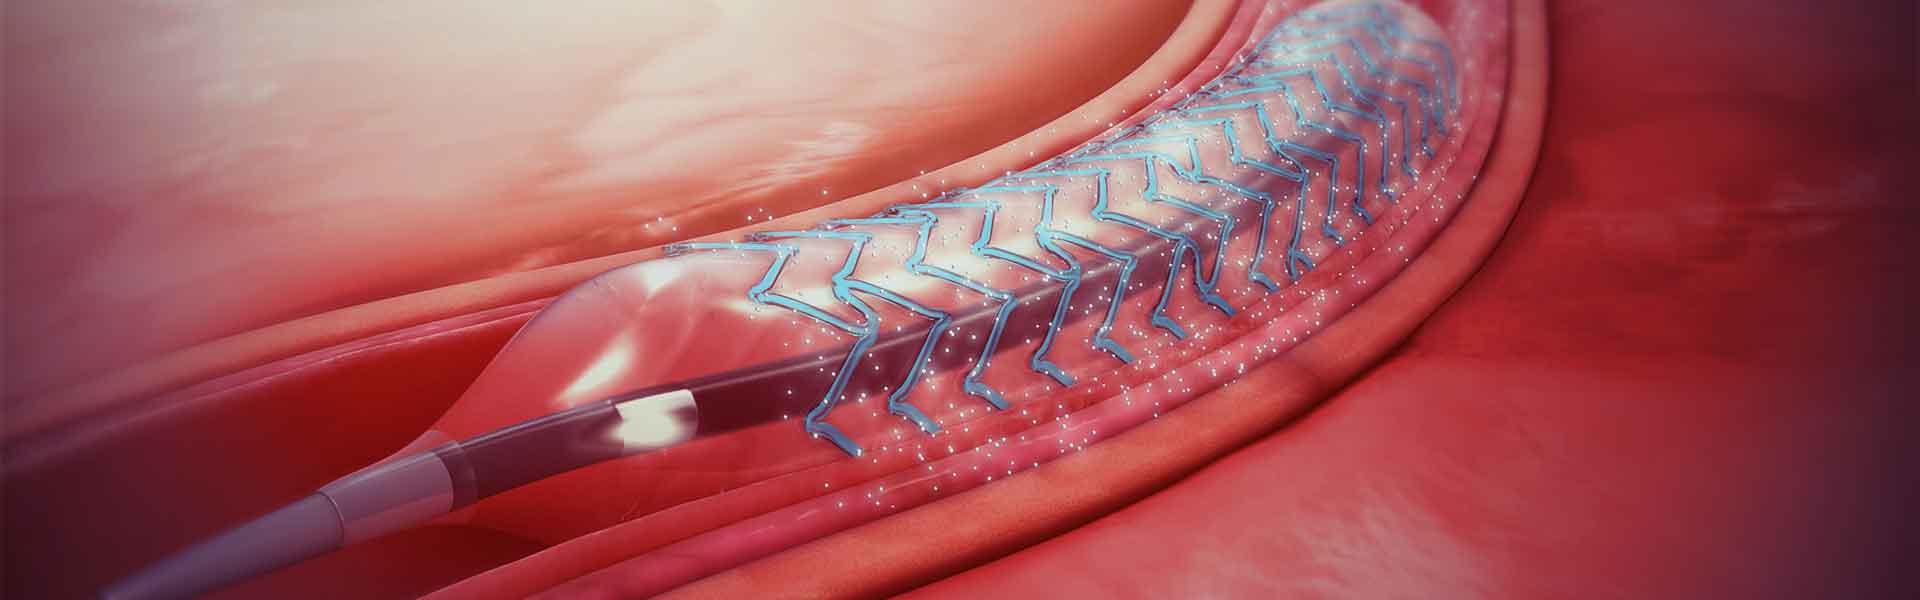 What Is A Better Option For Angioplasty A Bare Metal Stent Or A Drug